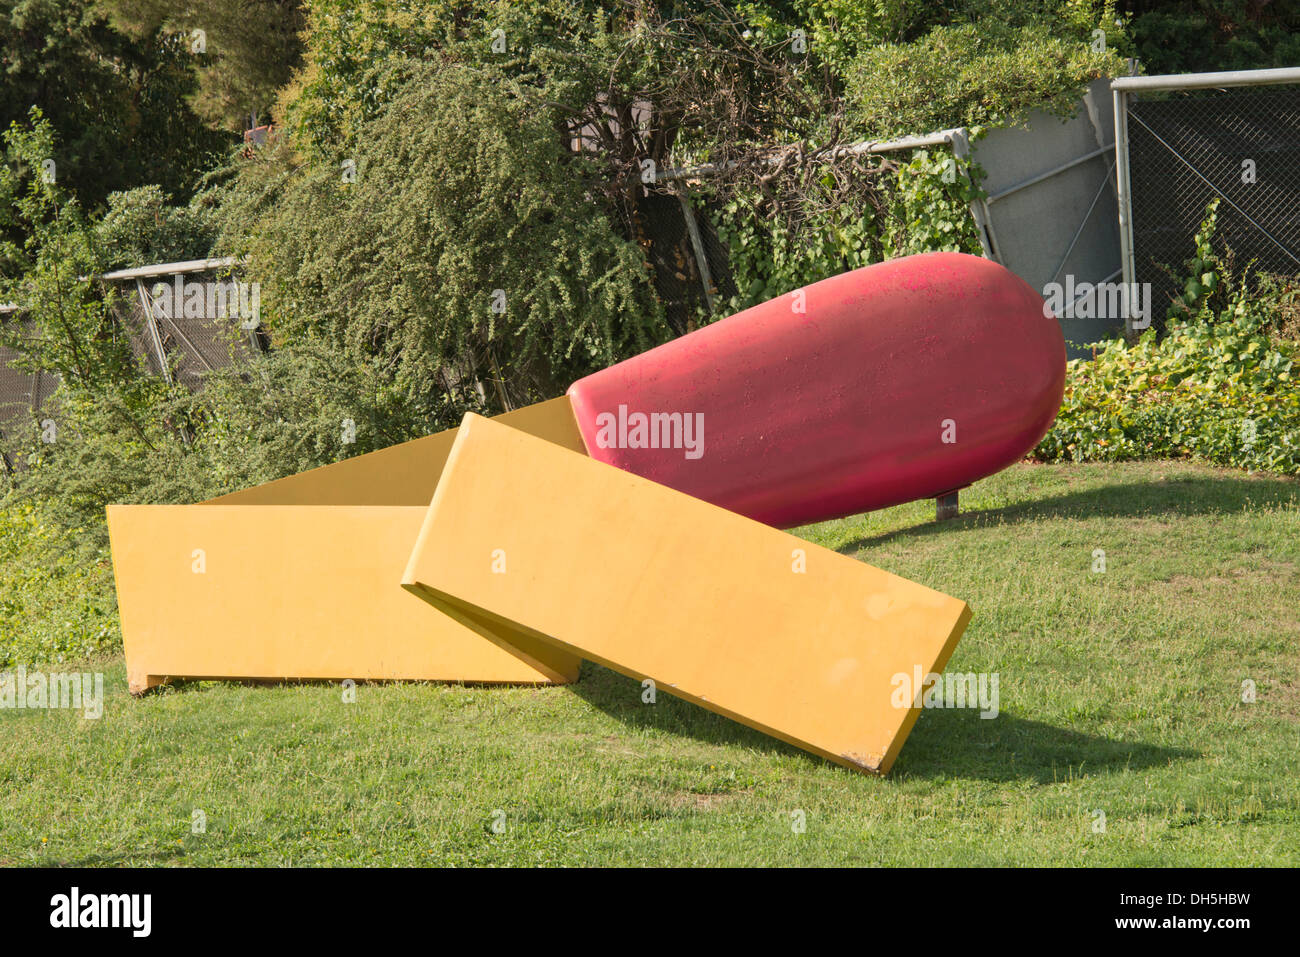 Europe, Spain, Barcelona, The Swedish artist Claes Oldenburg decided to turn into a giant sculpture an item Stock Photo